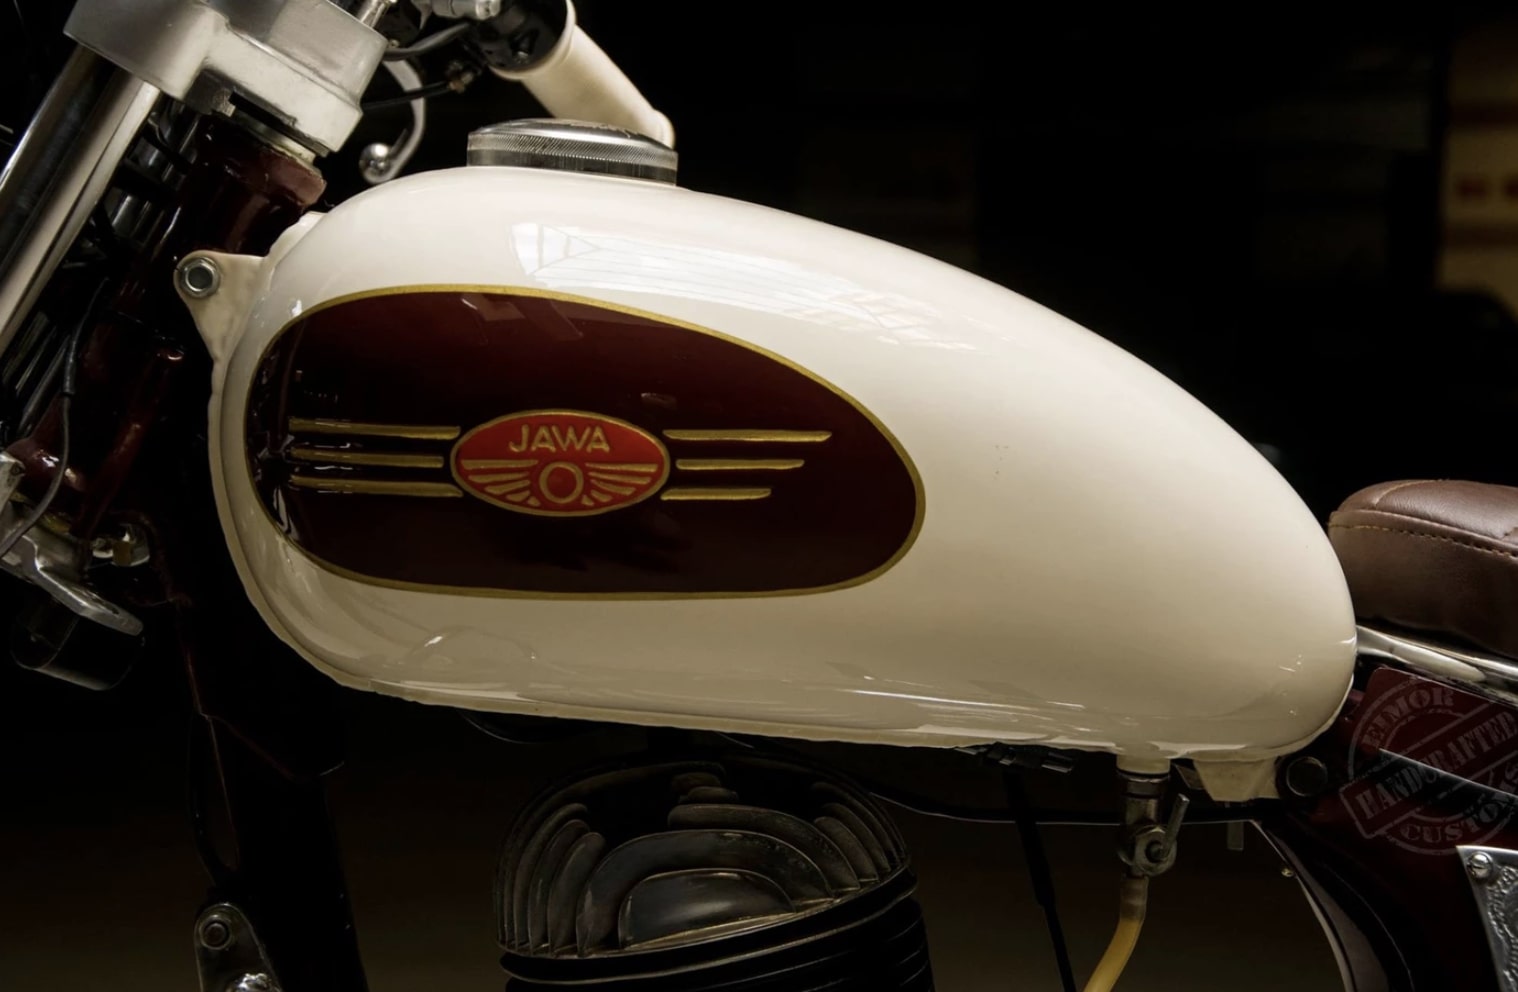 250cc Classic Jawa Motorcycle Quick Details and Live Photos - image